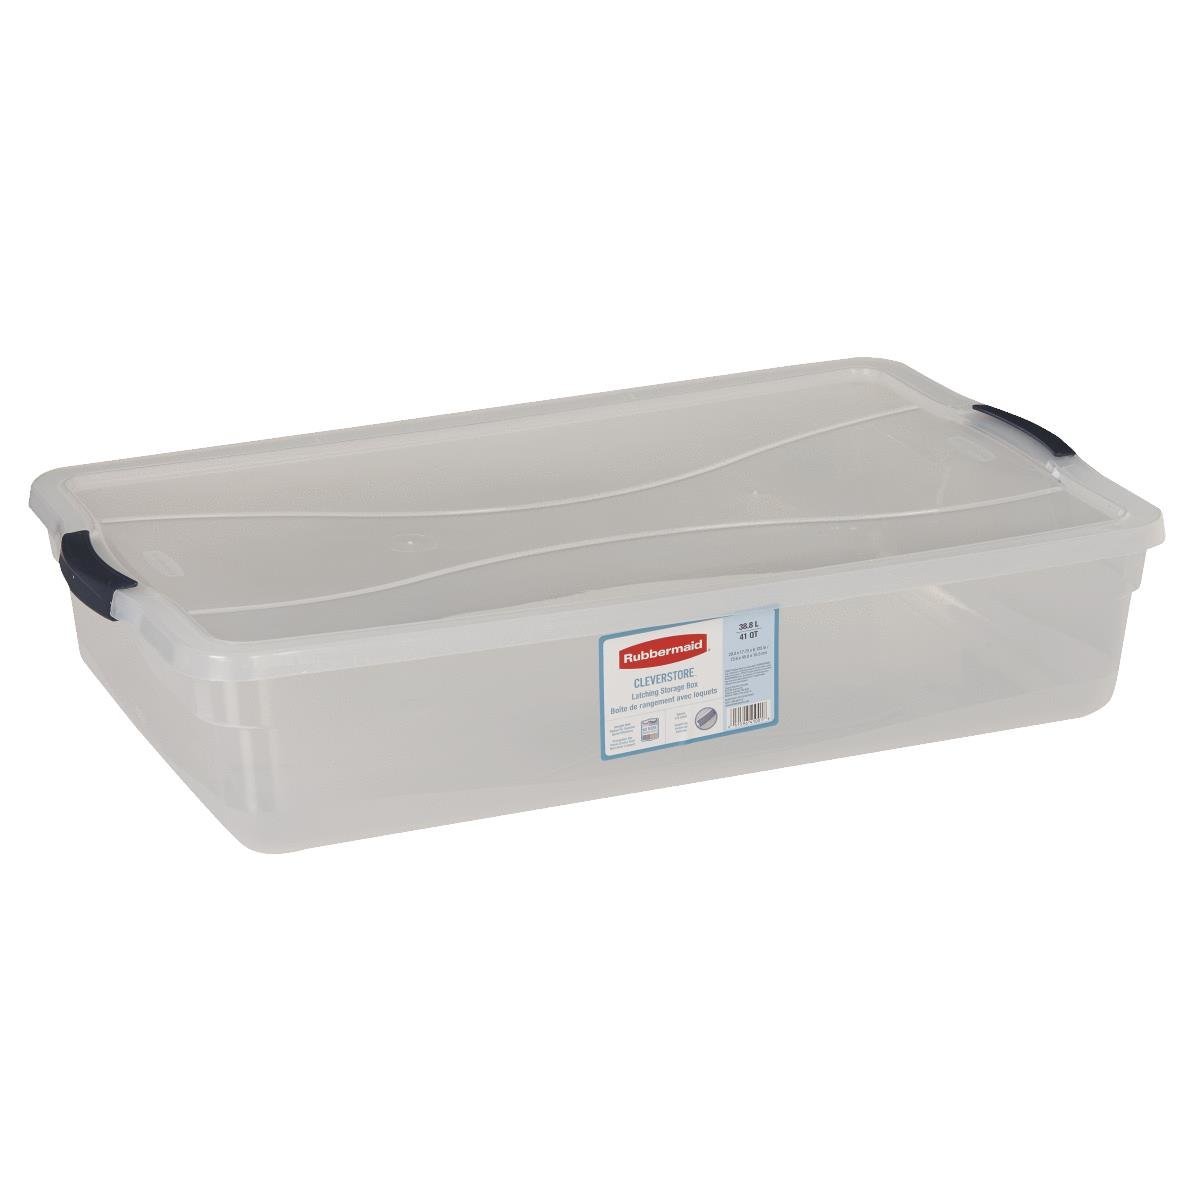 Rmcc410001 41 Qt. Clever Store Basic Latch Container With Clear Lid, Clear